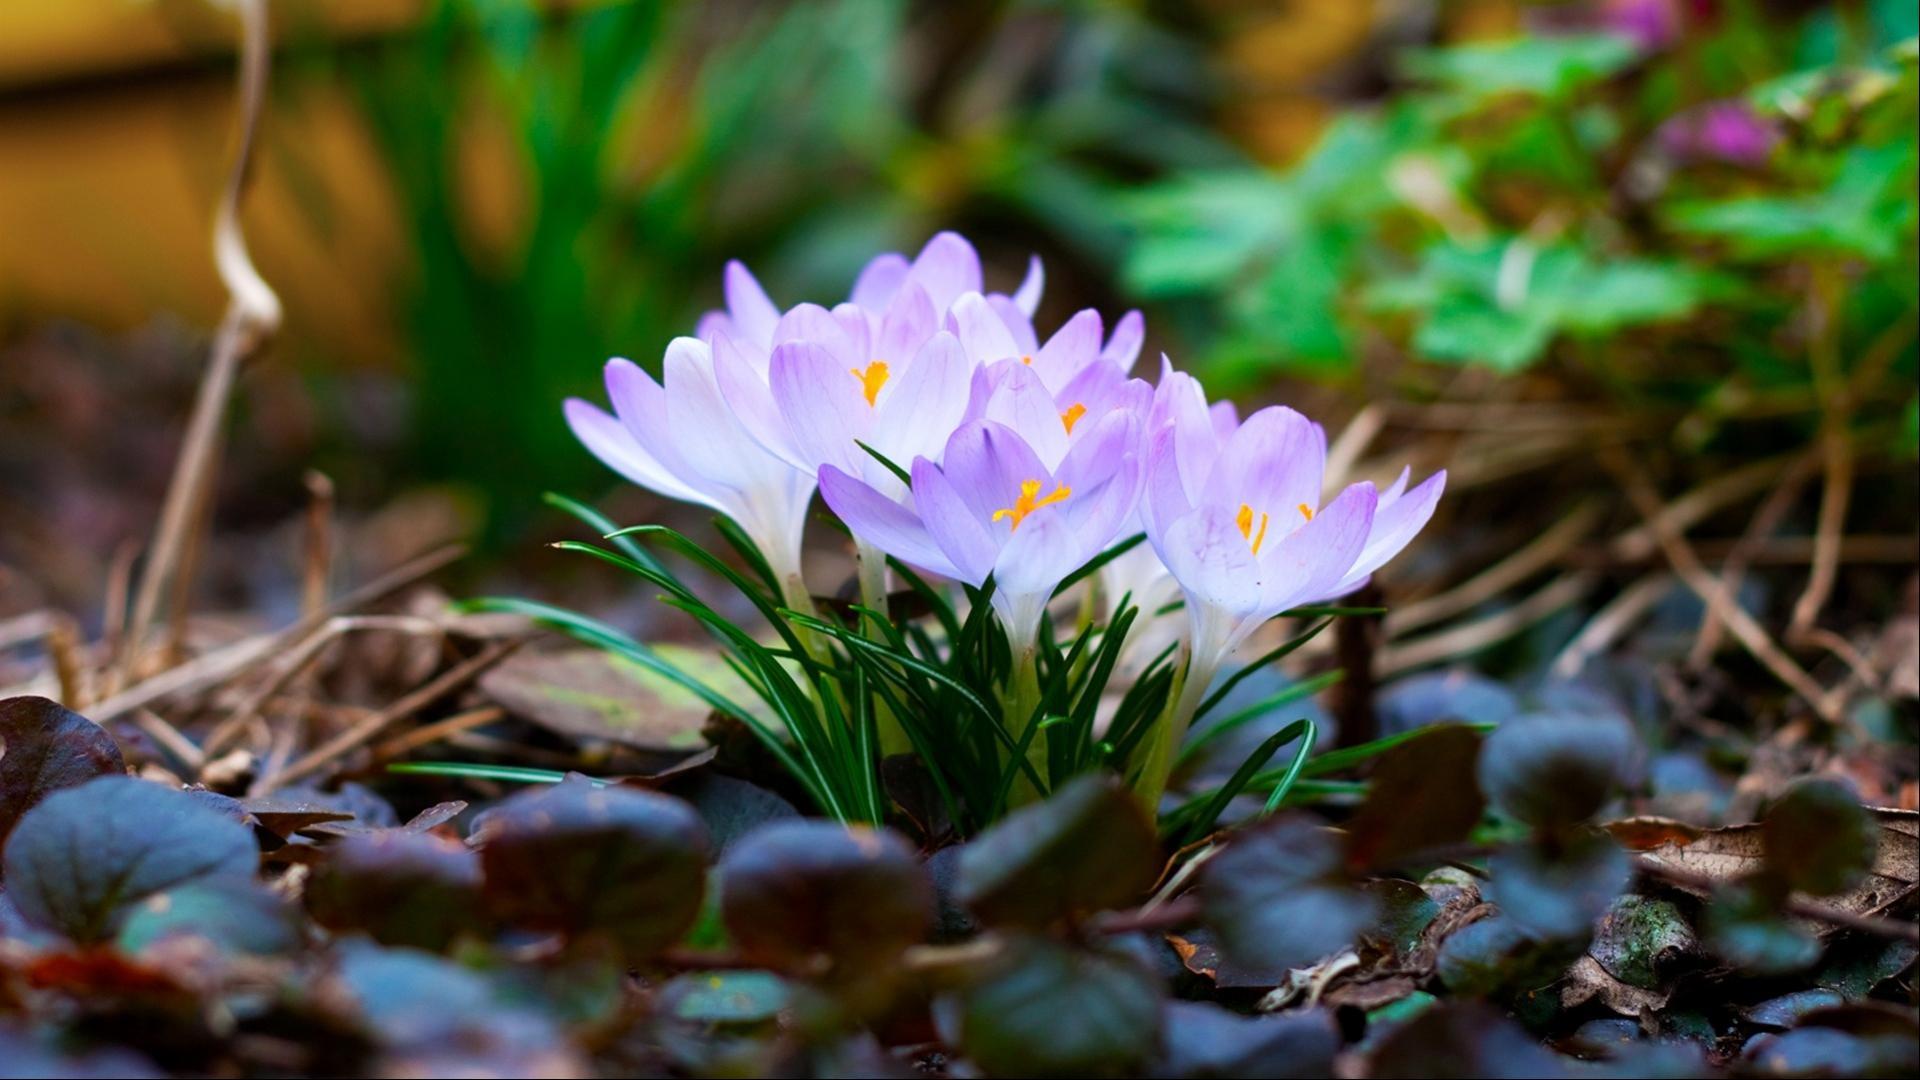 Full HD Nature Wallpaper for Laptop with Spring Flower in 1080p. HD